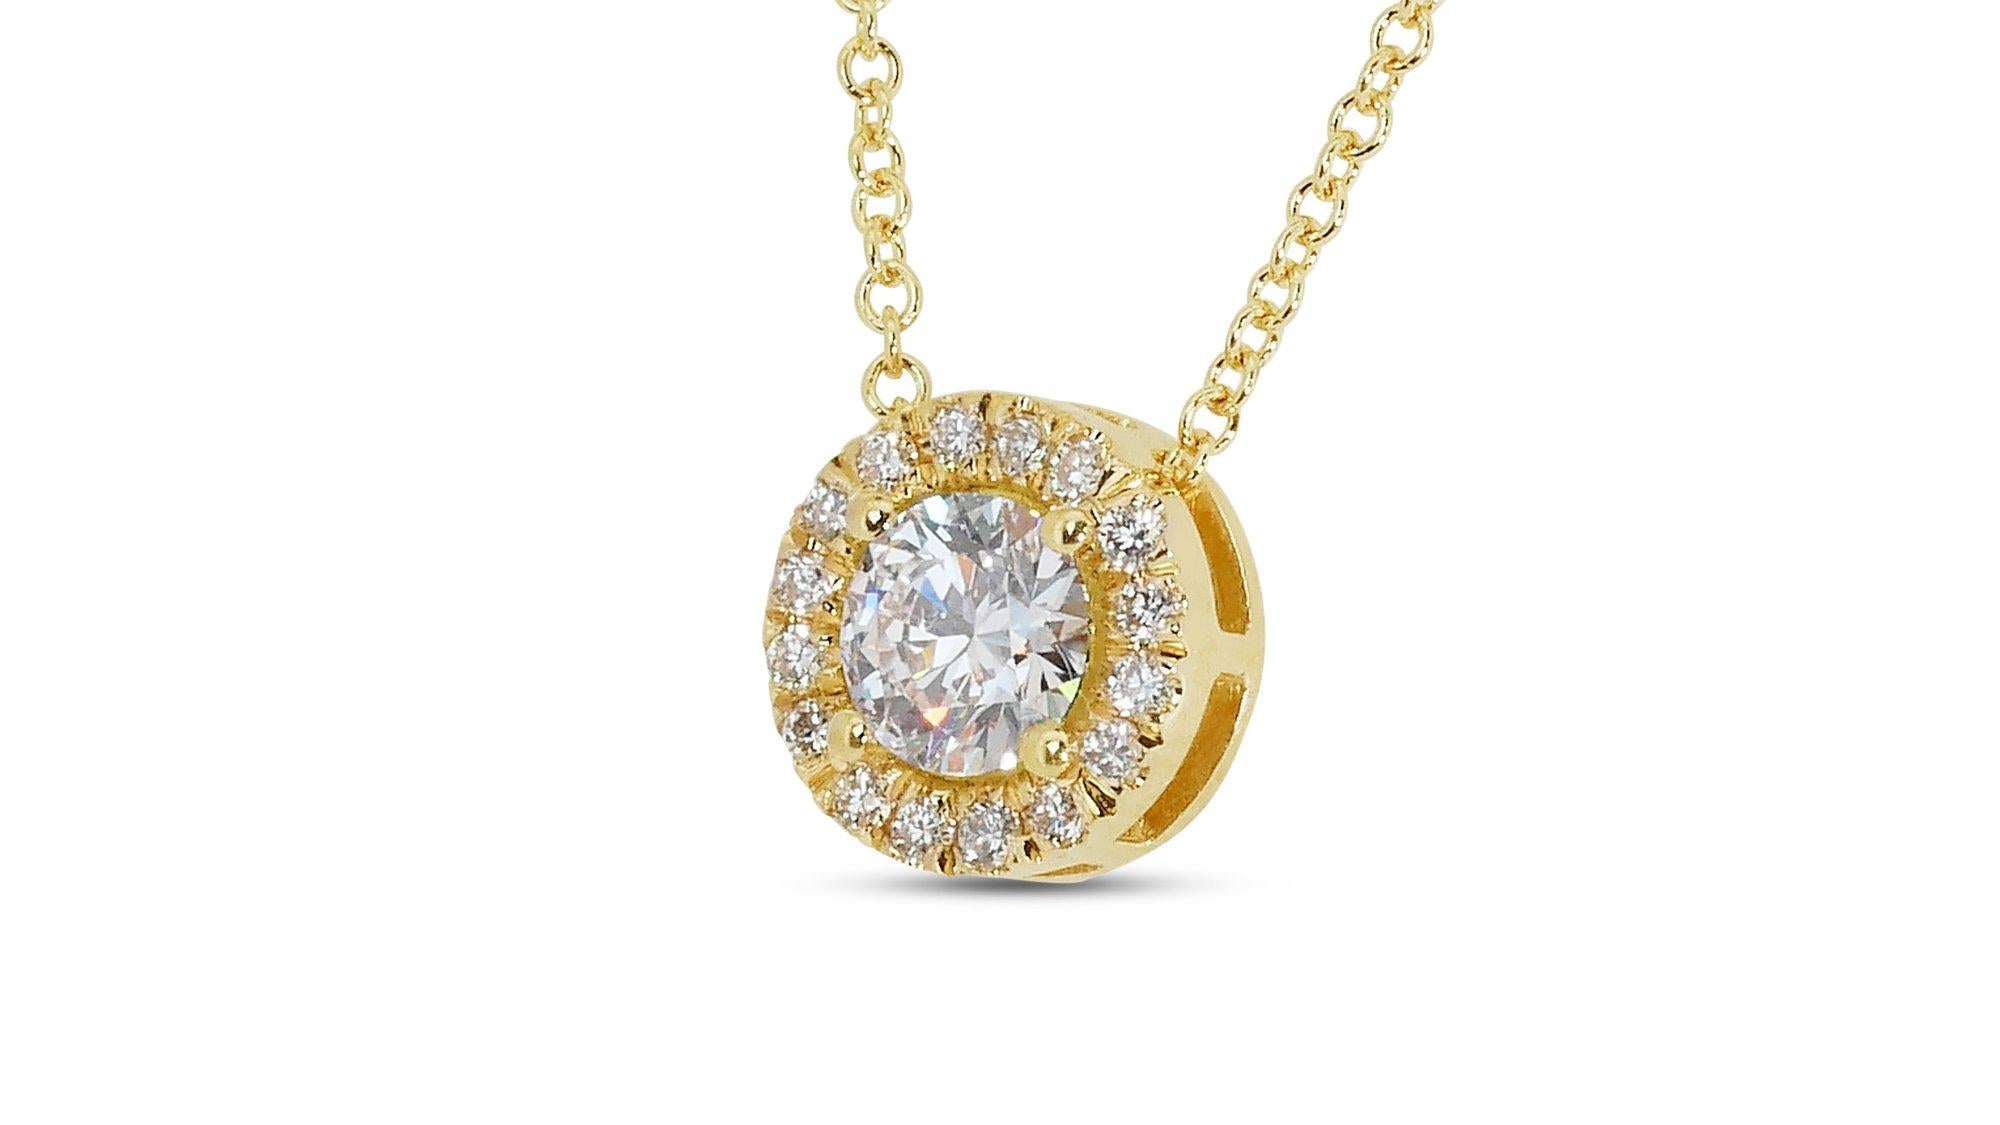 Alluring 1.17ct Diamond Halo Necklace in 18k Yellow Gold - GIA Certified In New Condition For Sale In רמת גן, IL